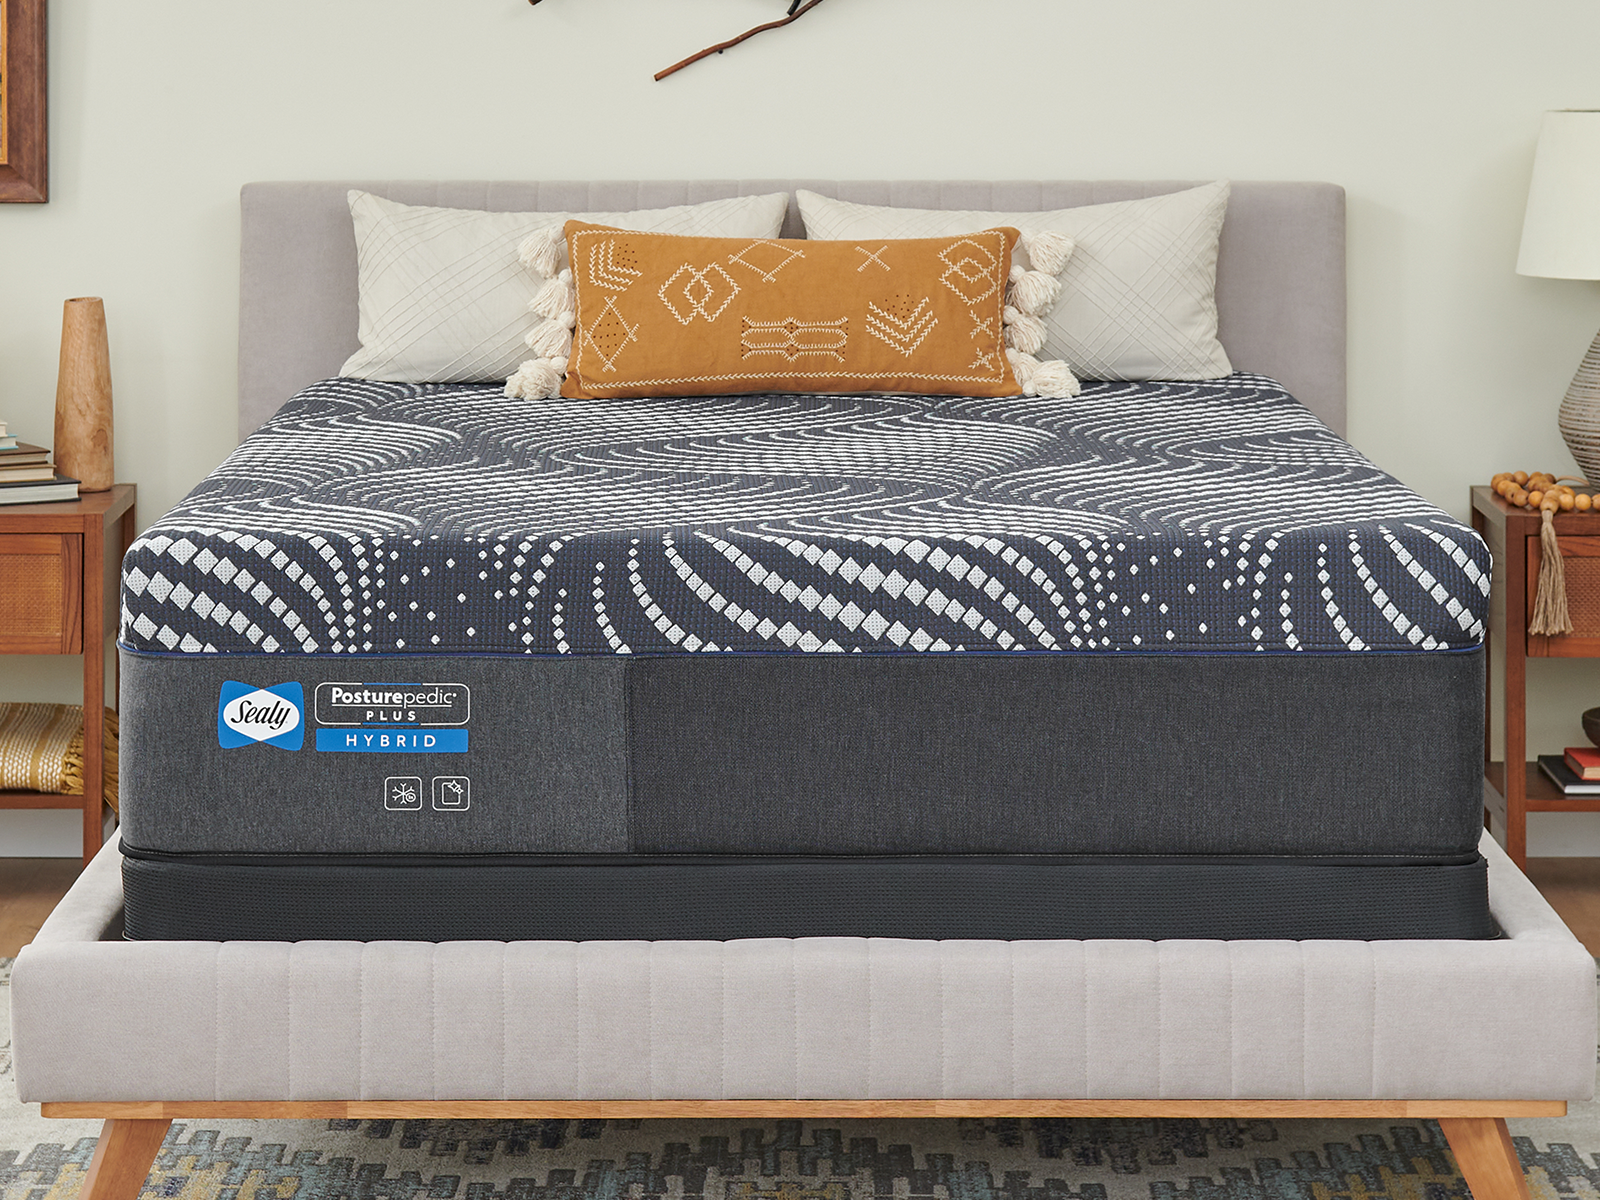 Sealy Twin Extra Long Posturepedic Plus Hybrid High Point 14 Inch Firm Mattress